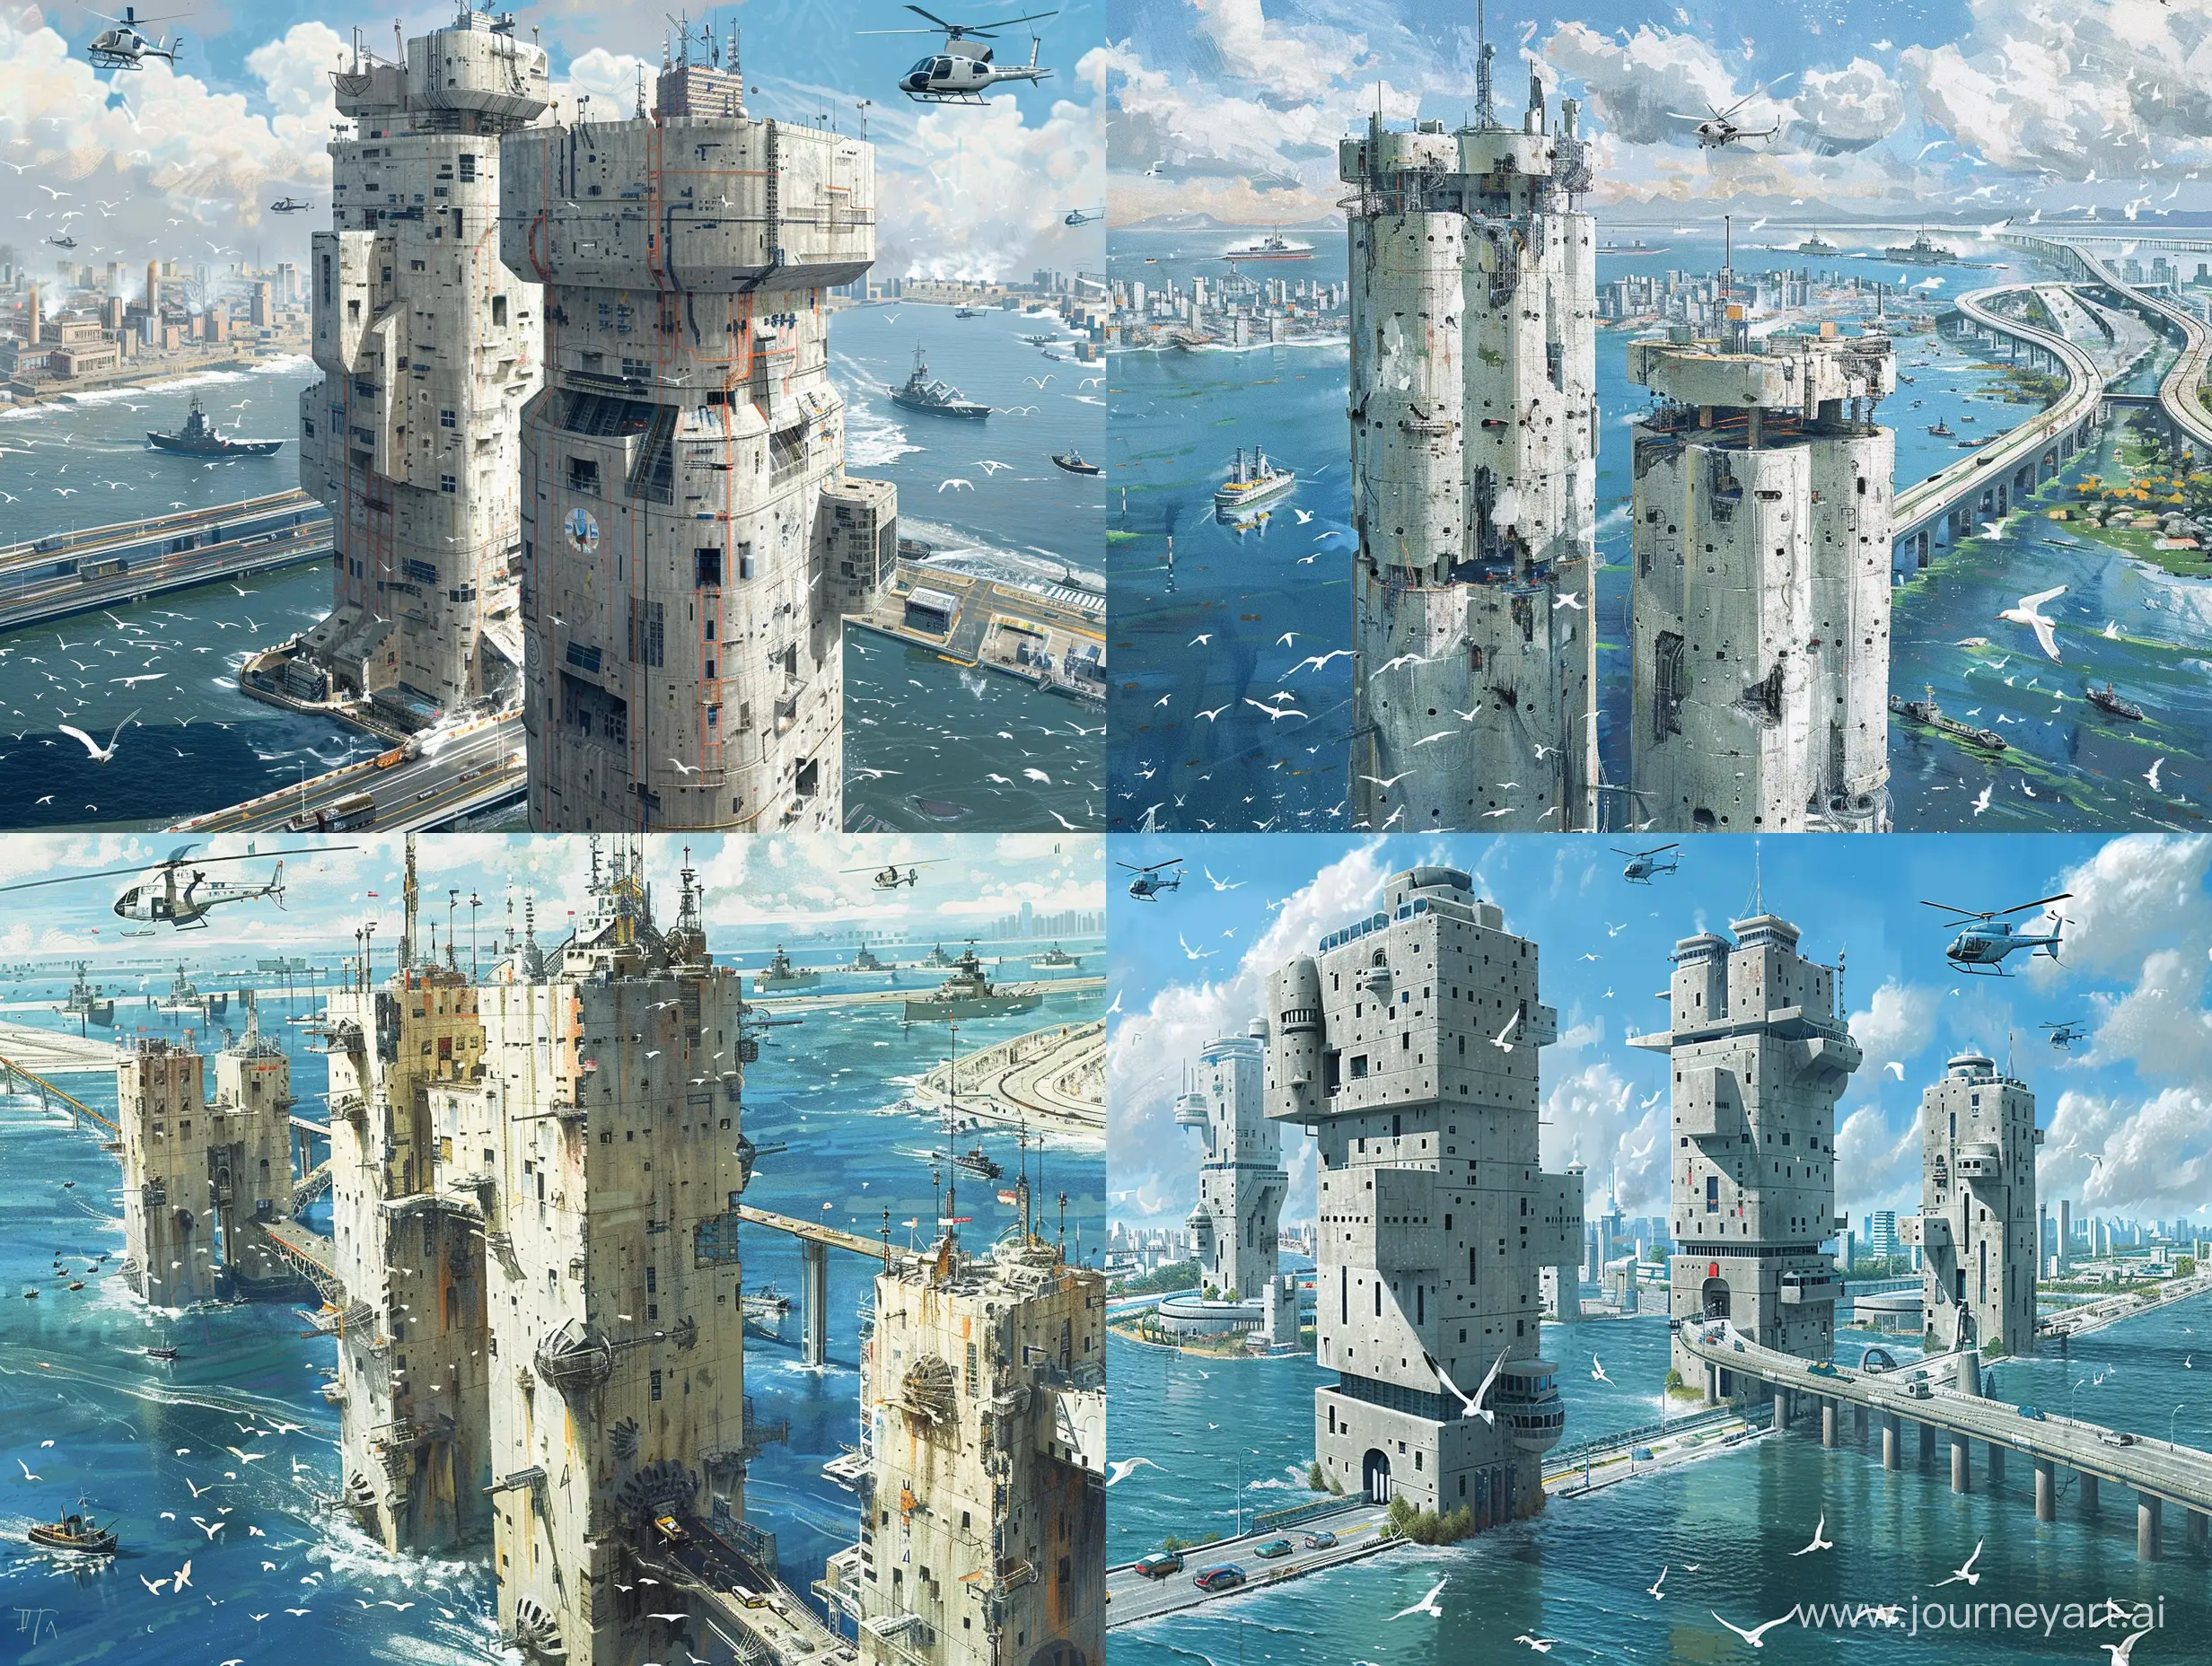 Concrete tower city, futuristic buildings, cuberpunk, city on water, highways, cyberpunk, seagulls, sea, beautiful sea, huge panorama, very detailed, helicopters, city panorama, warships in the background, ships, digital drawing, paint drawing, oil painting, flooded city, 